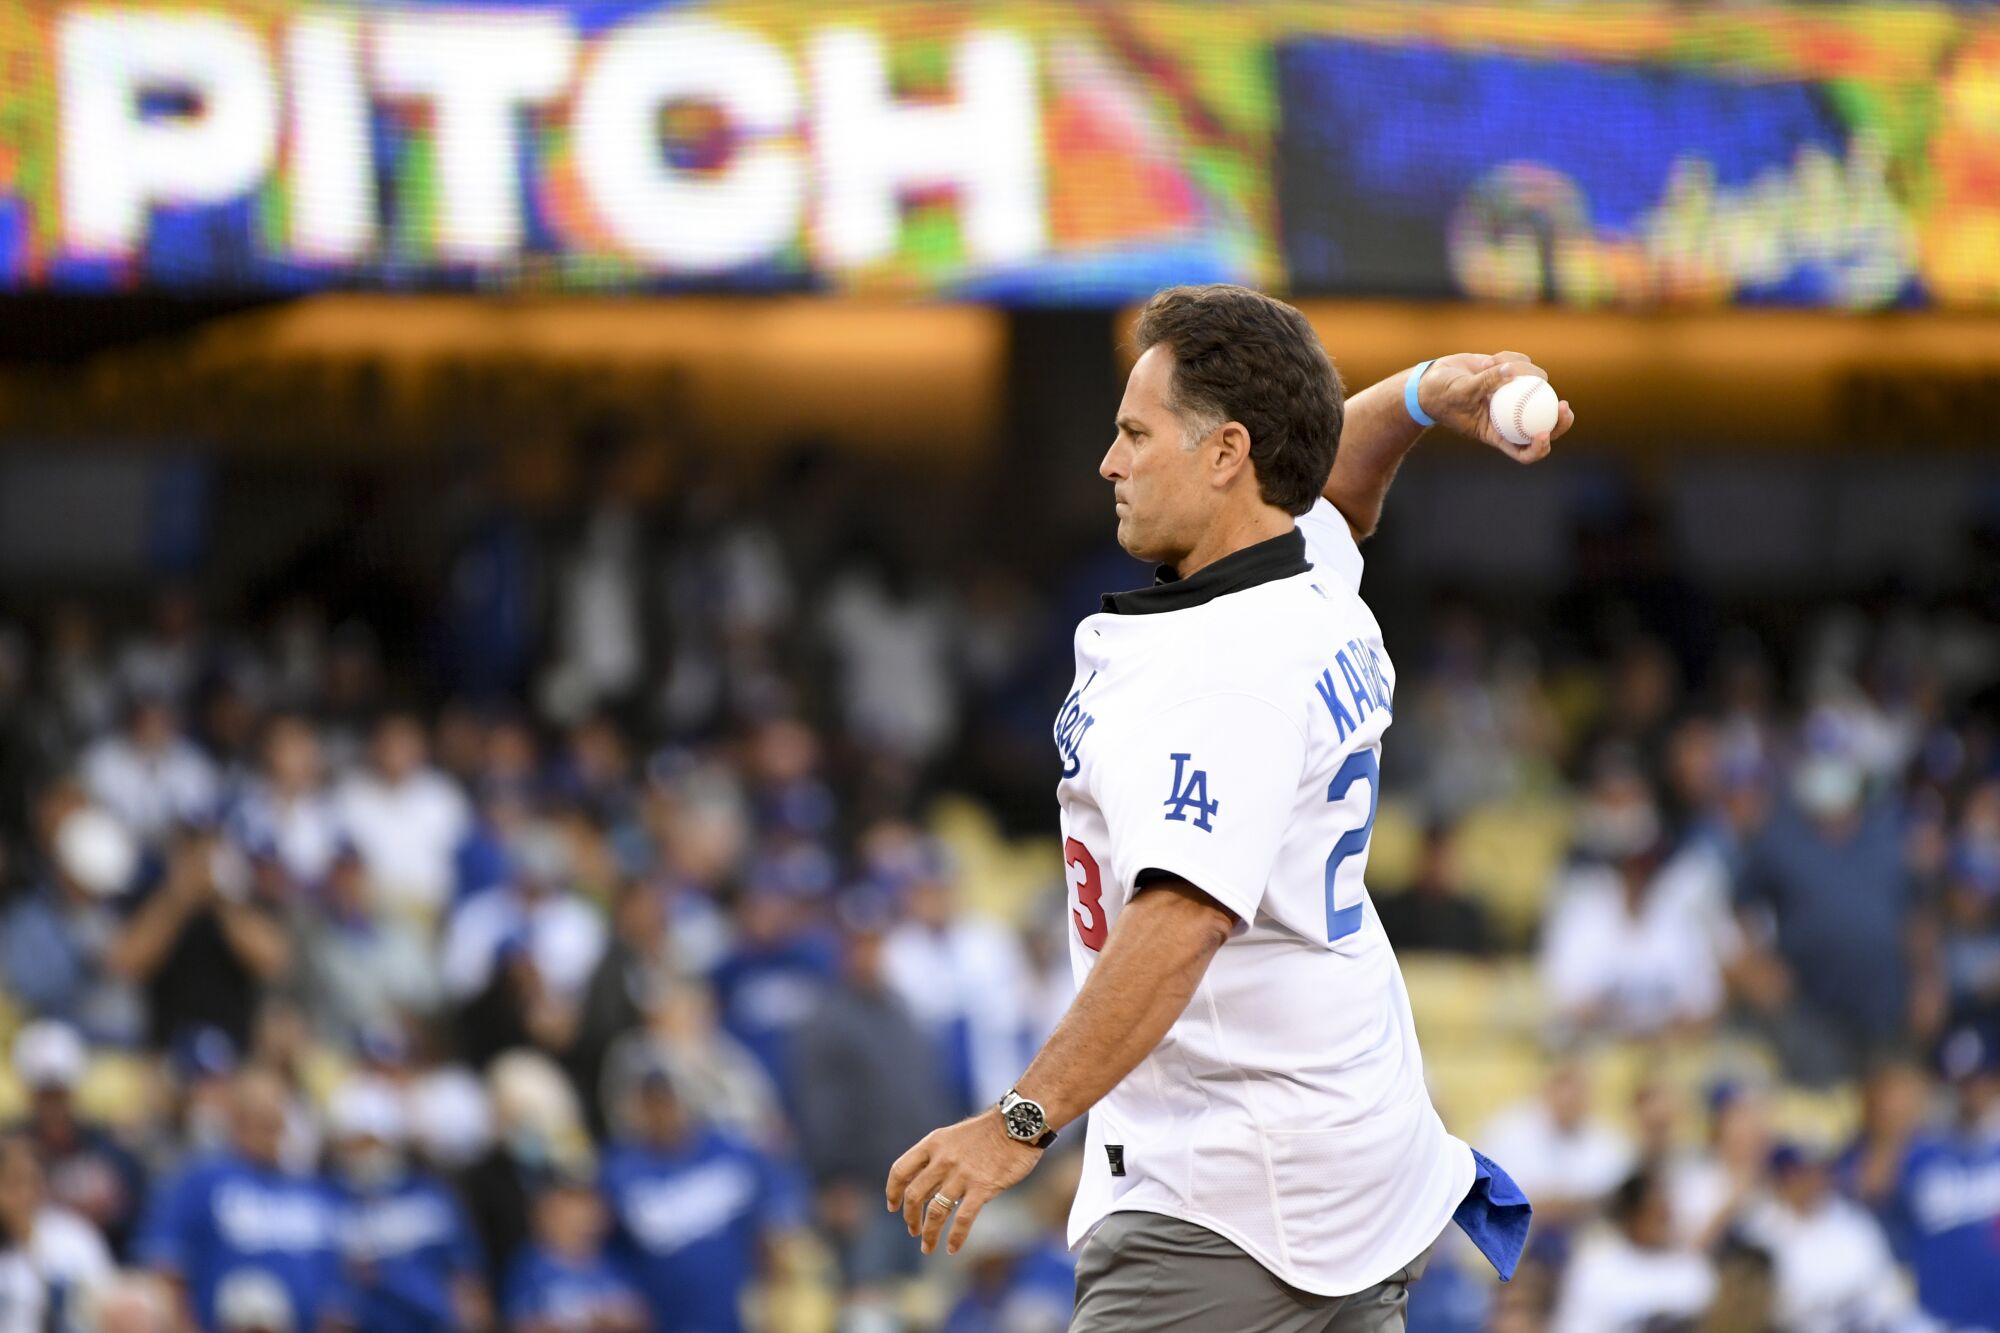 Eric Karros throws out the honorary first pitch.